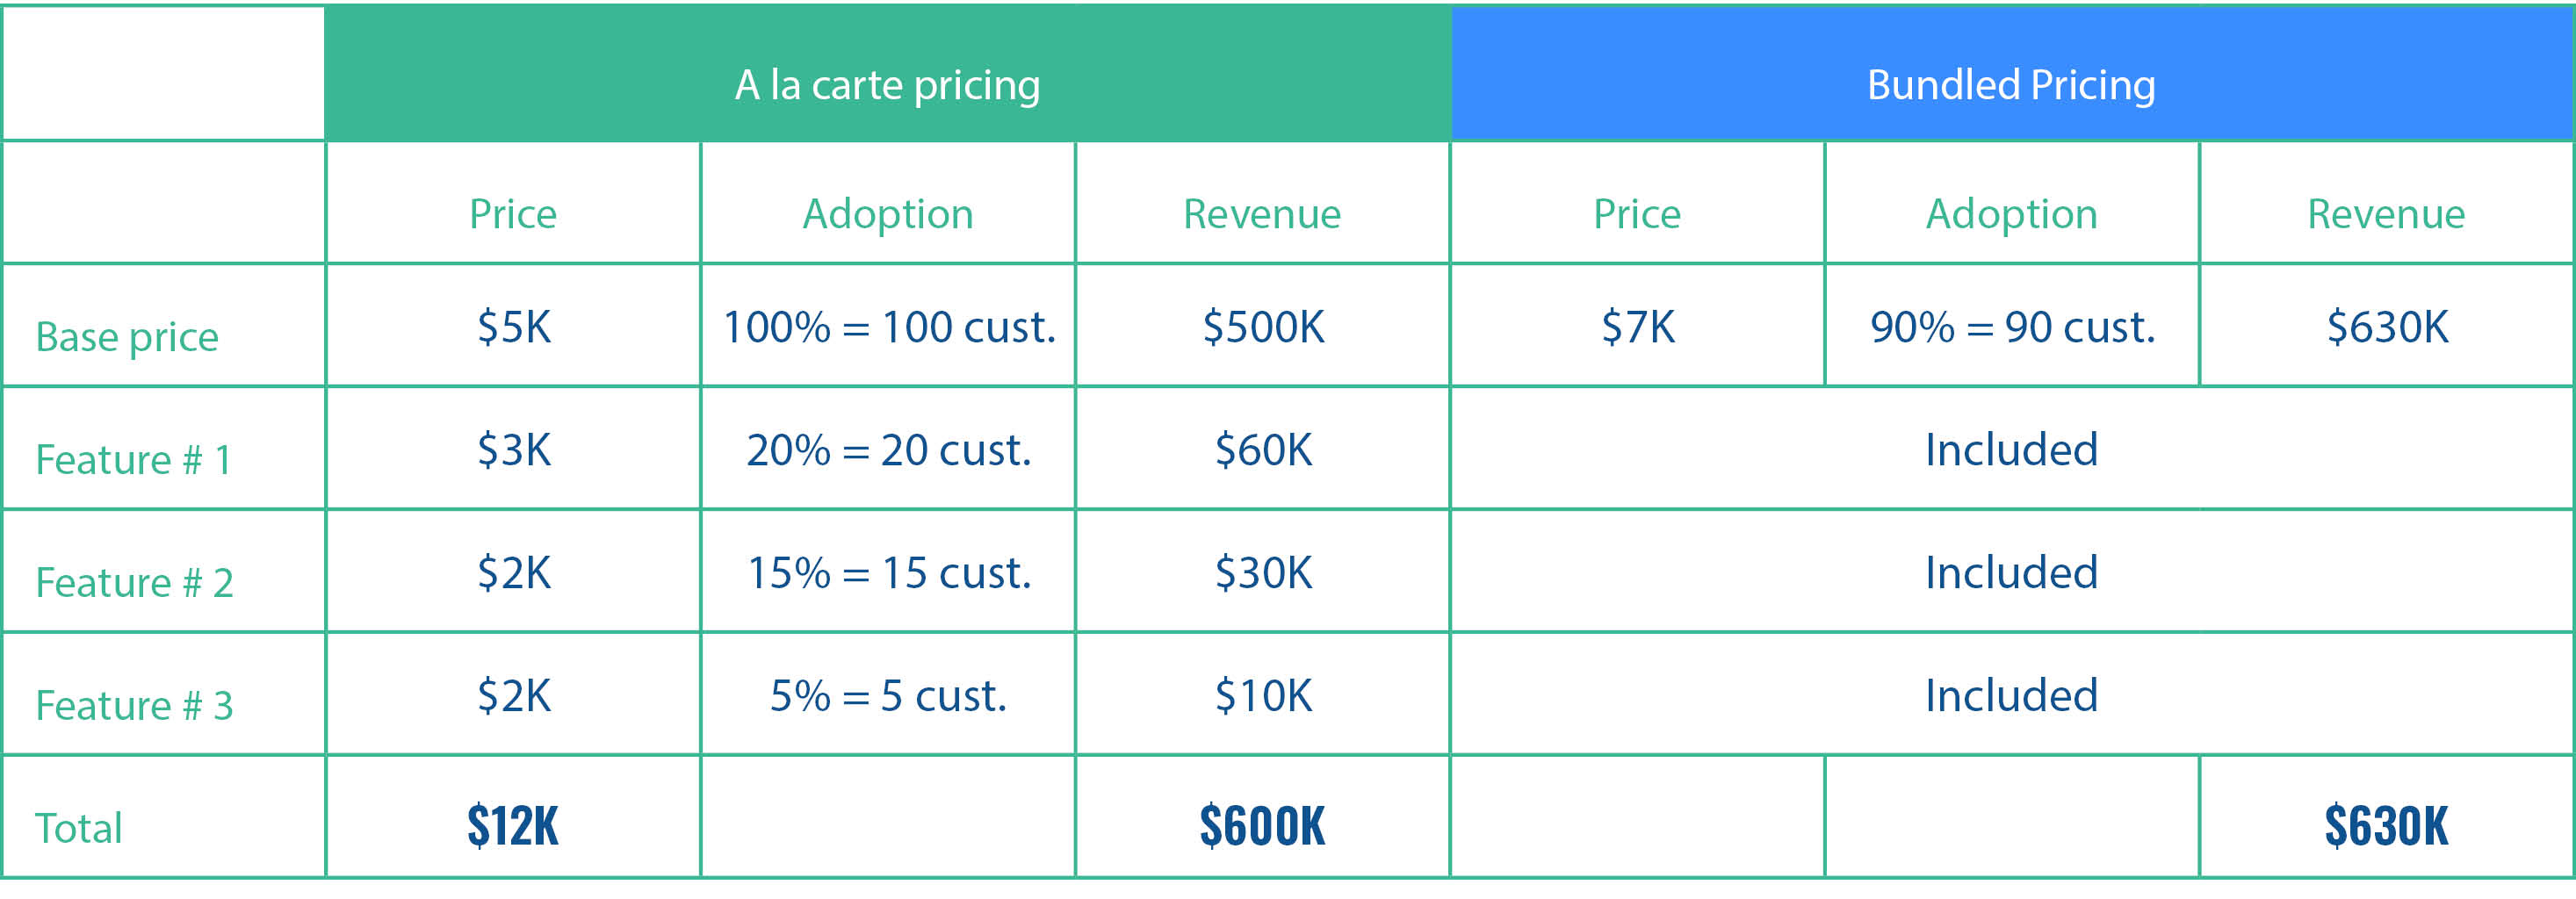 3 Strategies That Can Help Grow Recurring Revenue Through Pricing